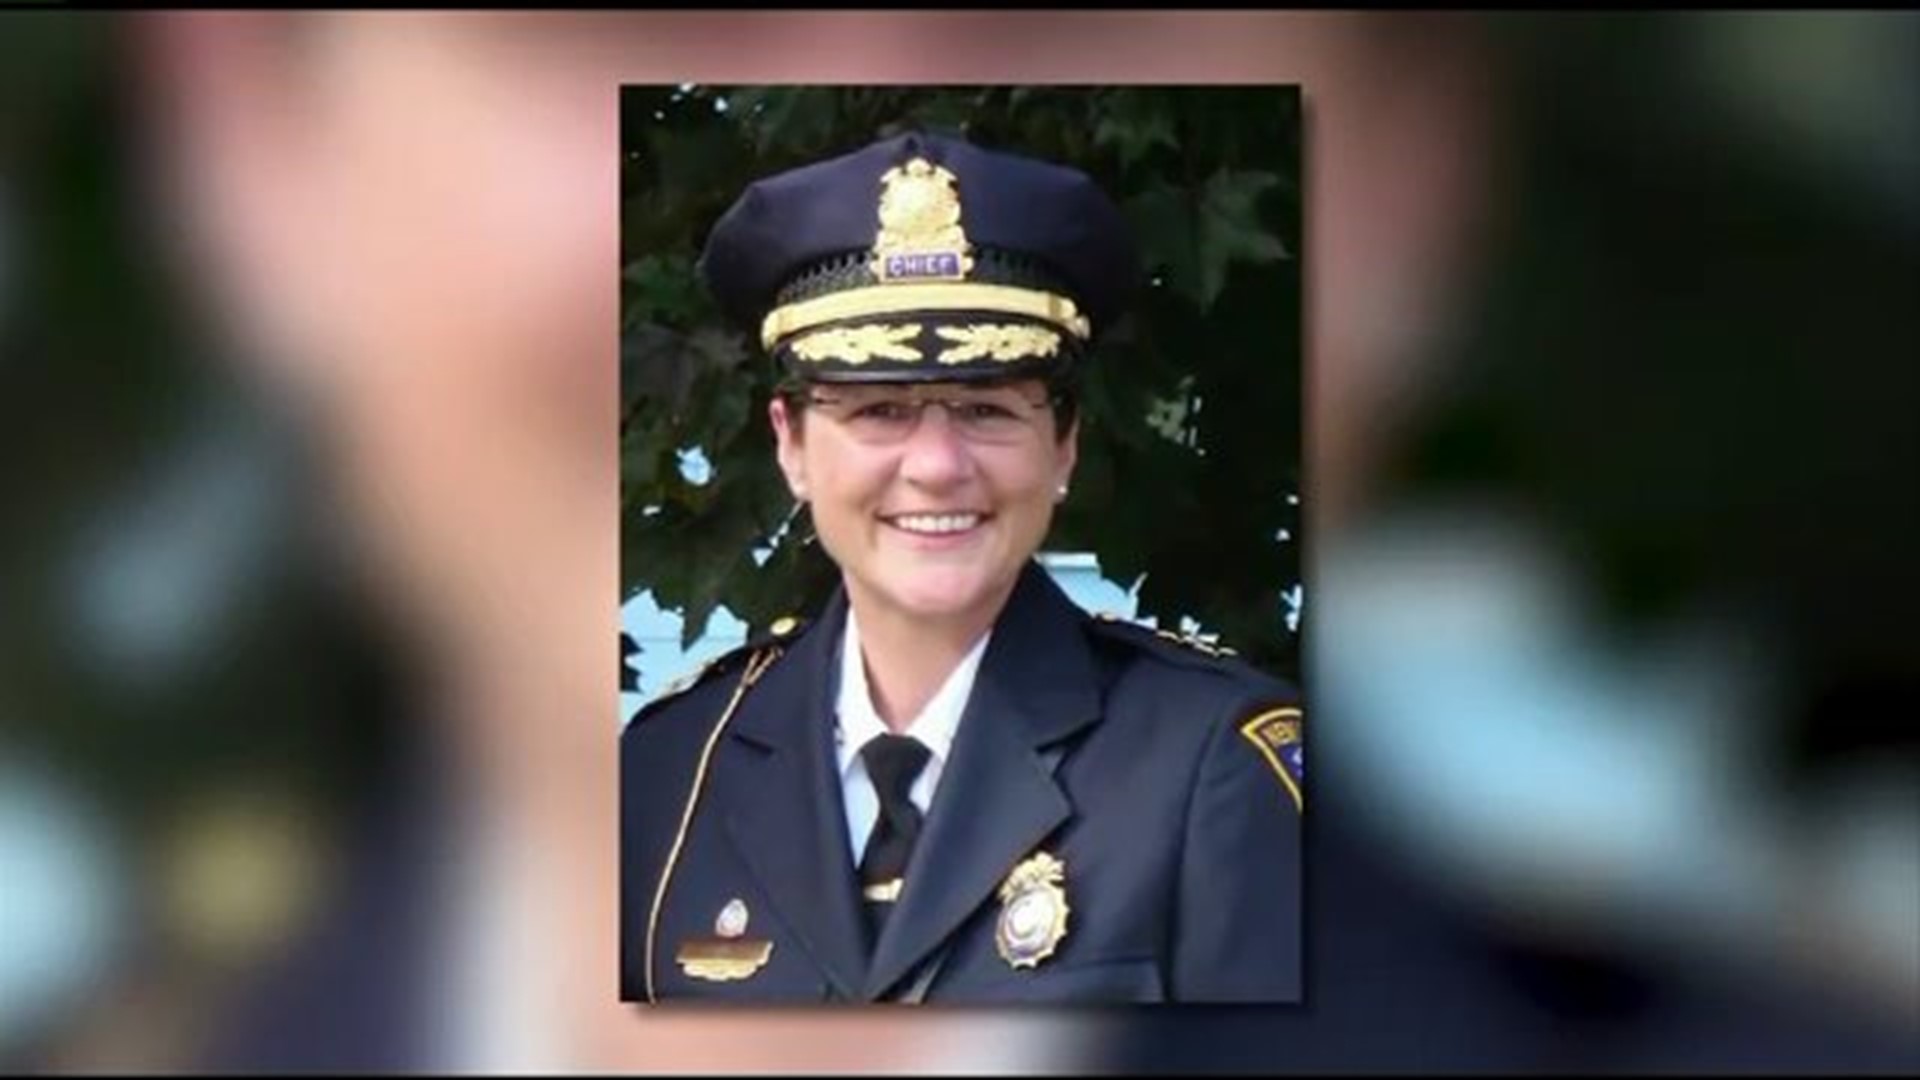 Mayor asks for money to investigate police chief in New London